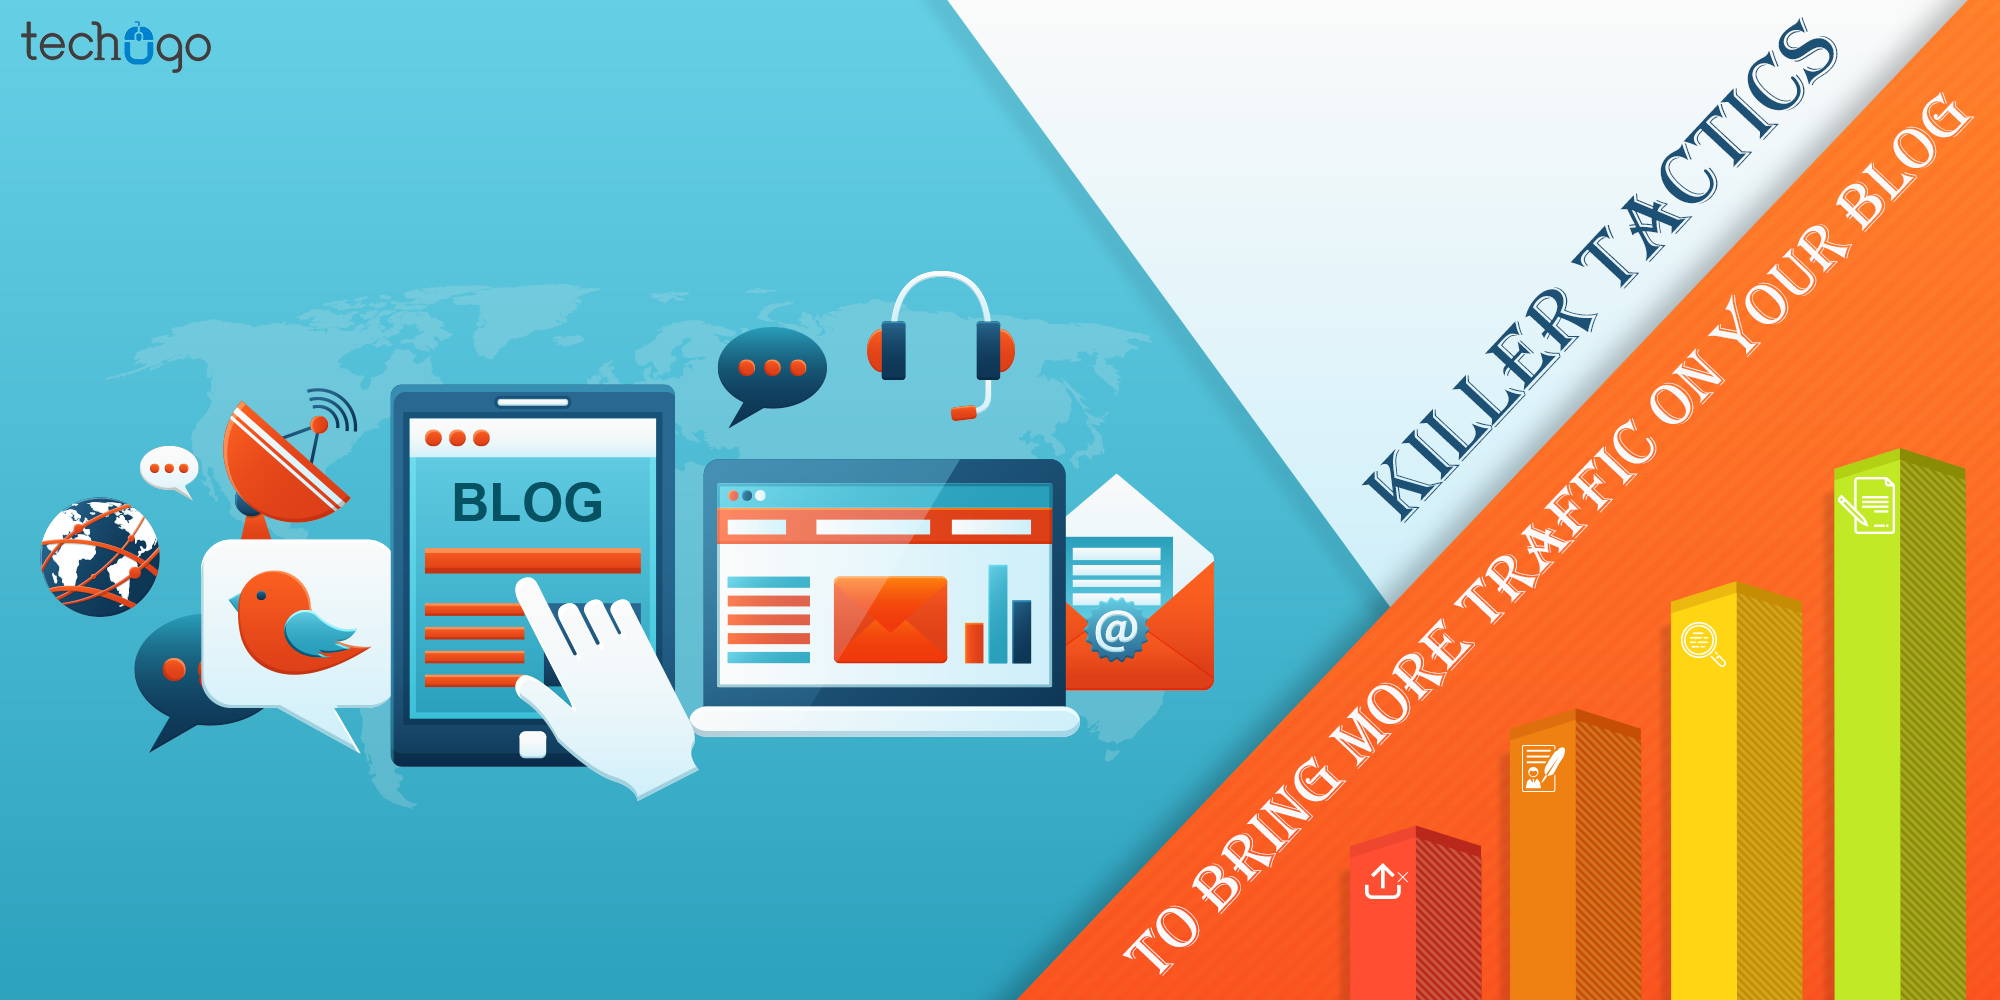 Killer Tactics To Bring More Traffic On Your Blog